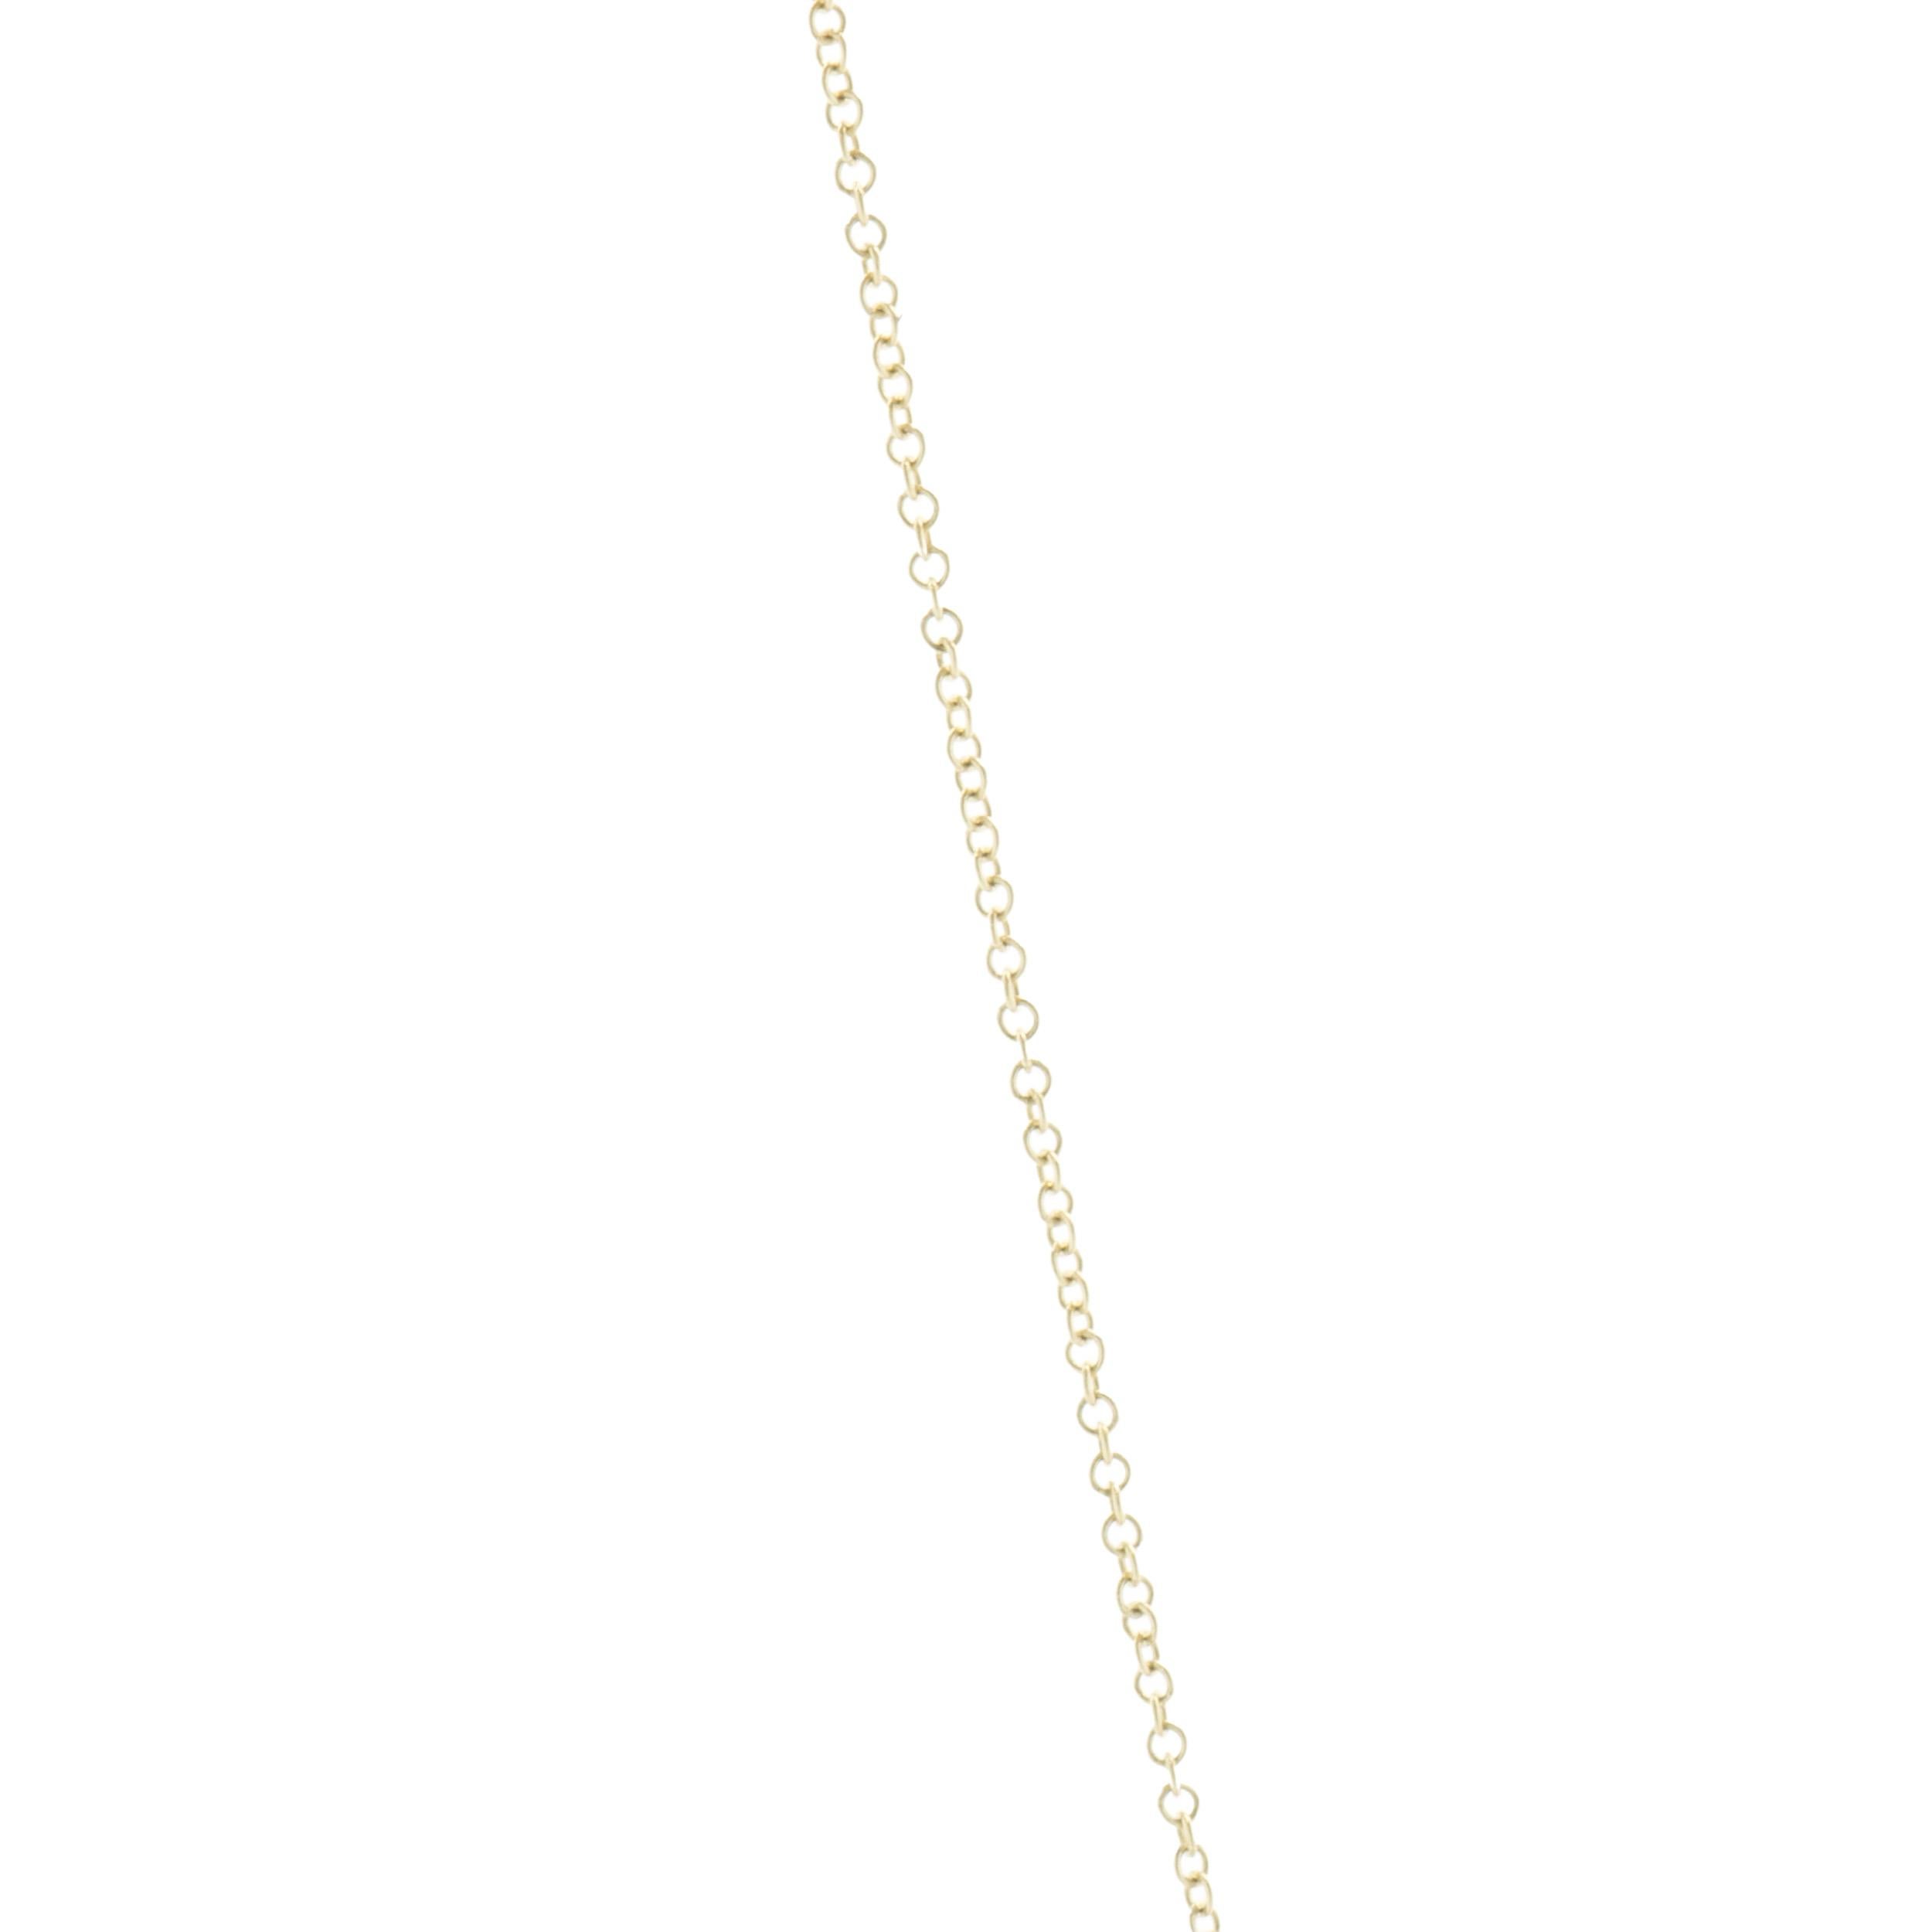 Designer: custom
Material: 14K yellow gold
Diamonds: 37 round brilliant cut = 0.28cttw
Color: G
Clarity: VS1-2
Weight: 2.28 grams
Dimensions: necklace measures 16-inches long